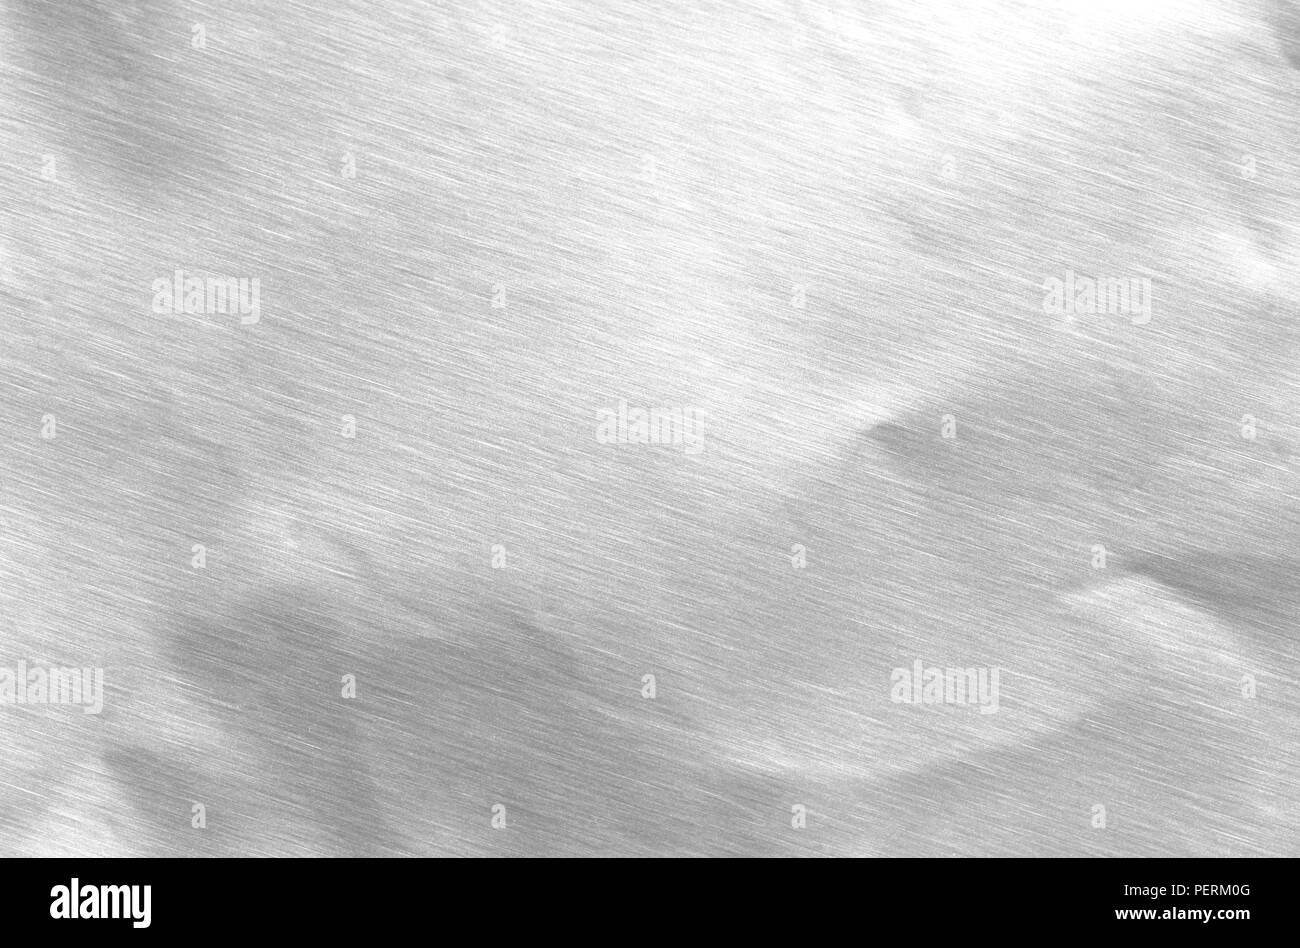 Shiny leaf silver foil abstract texture background Stock Photo